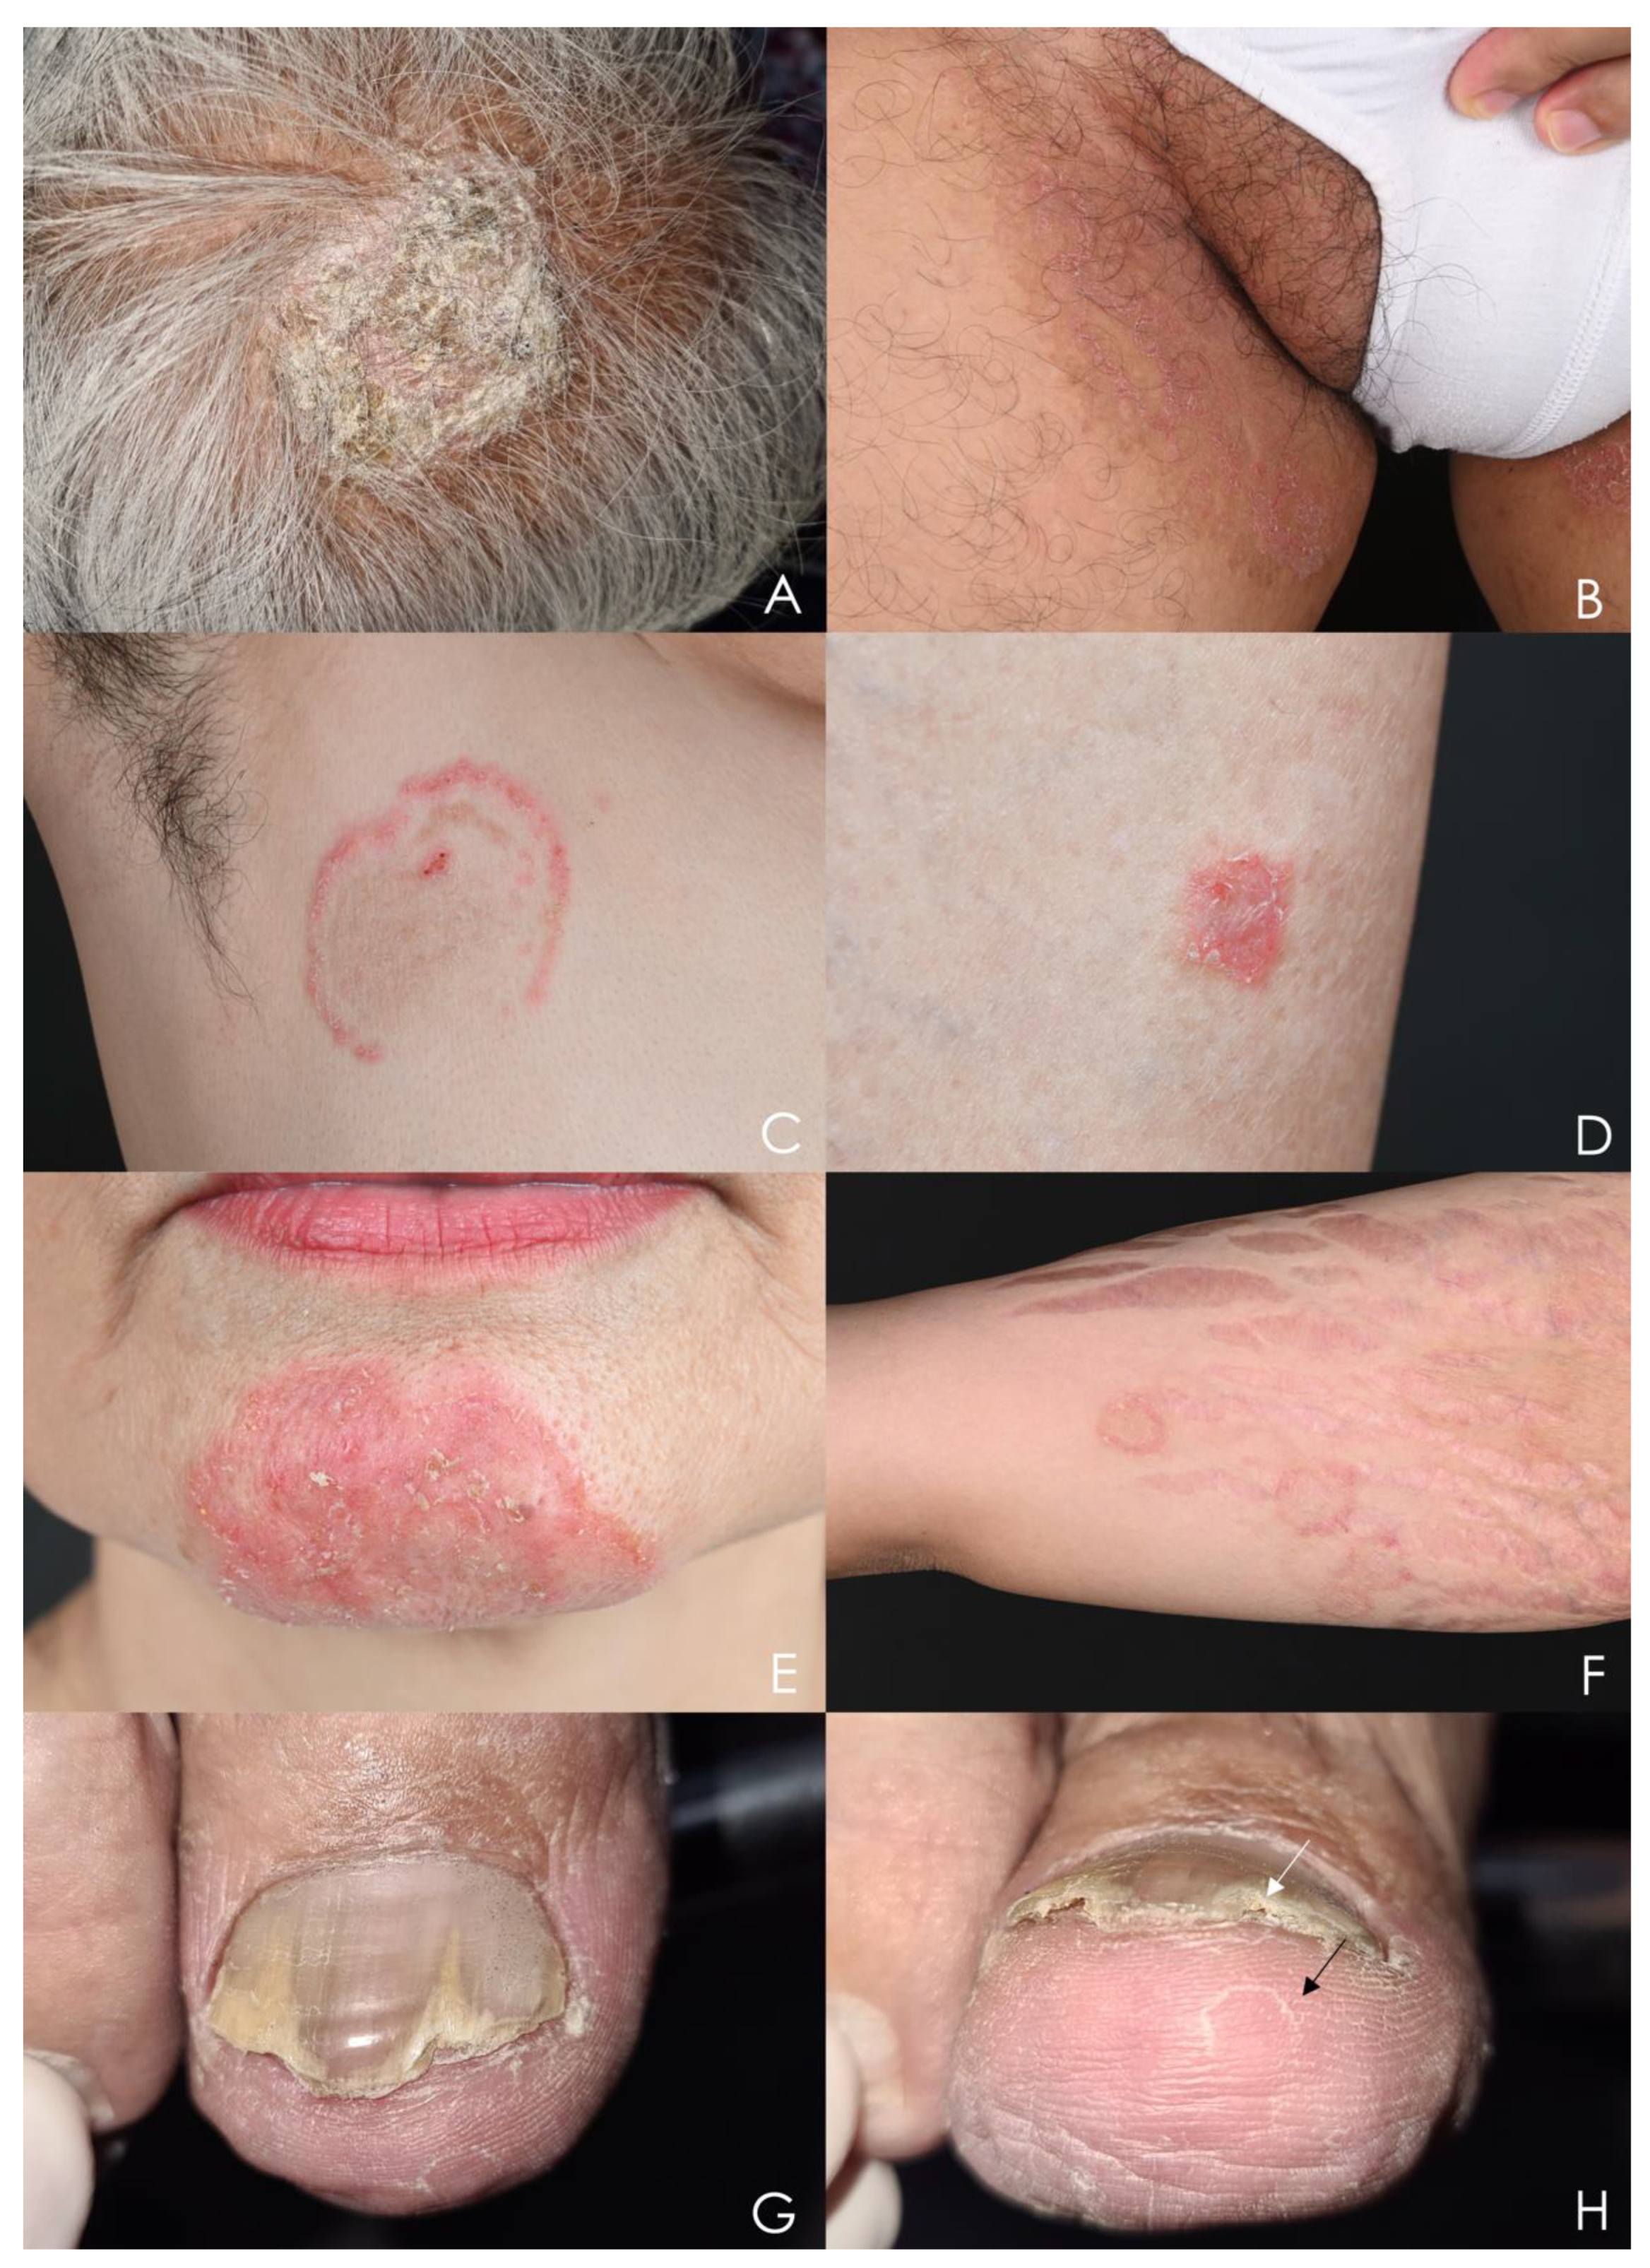 Ringworm, molluscum & other common rashes | Qoctor the online doctor